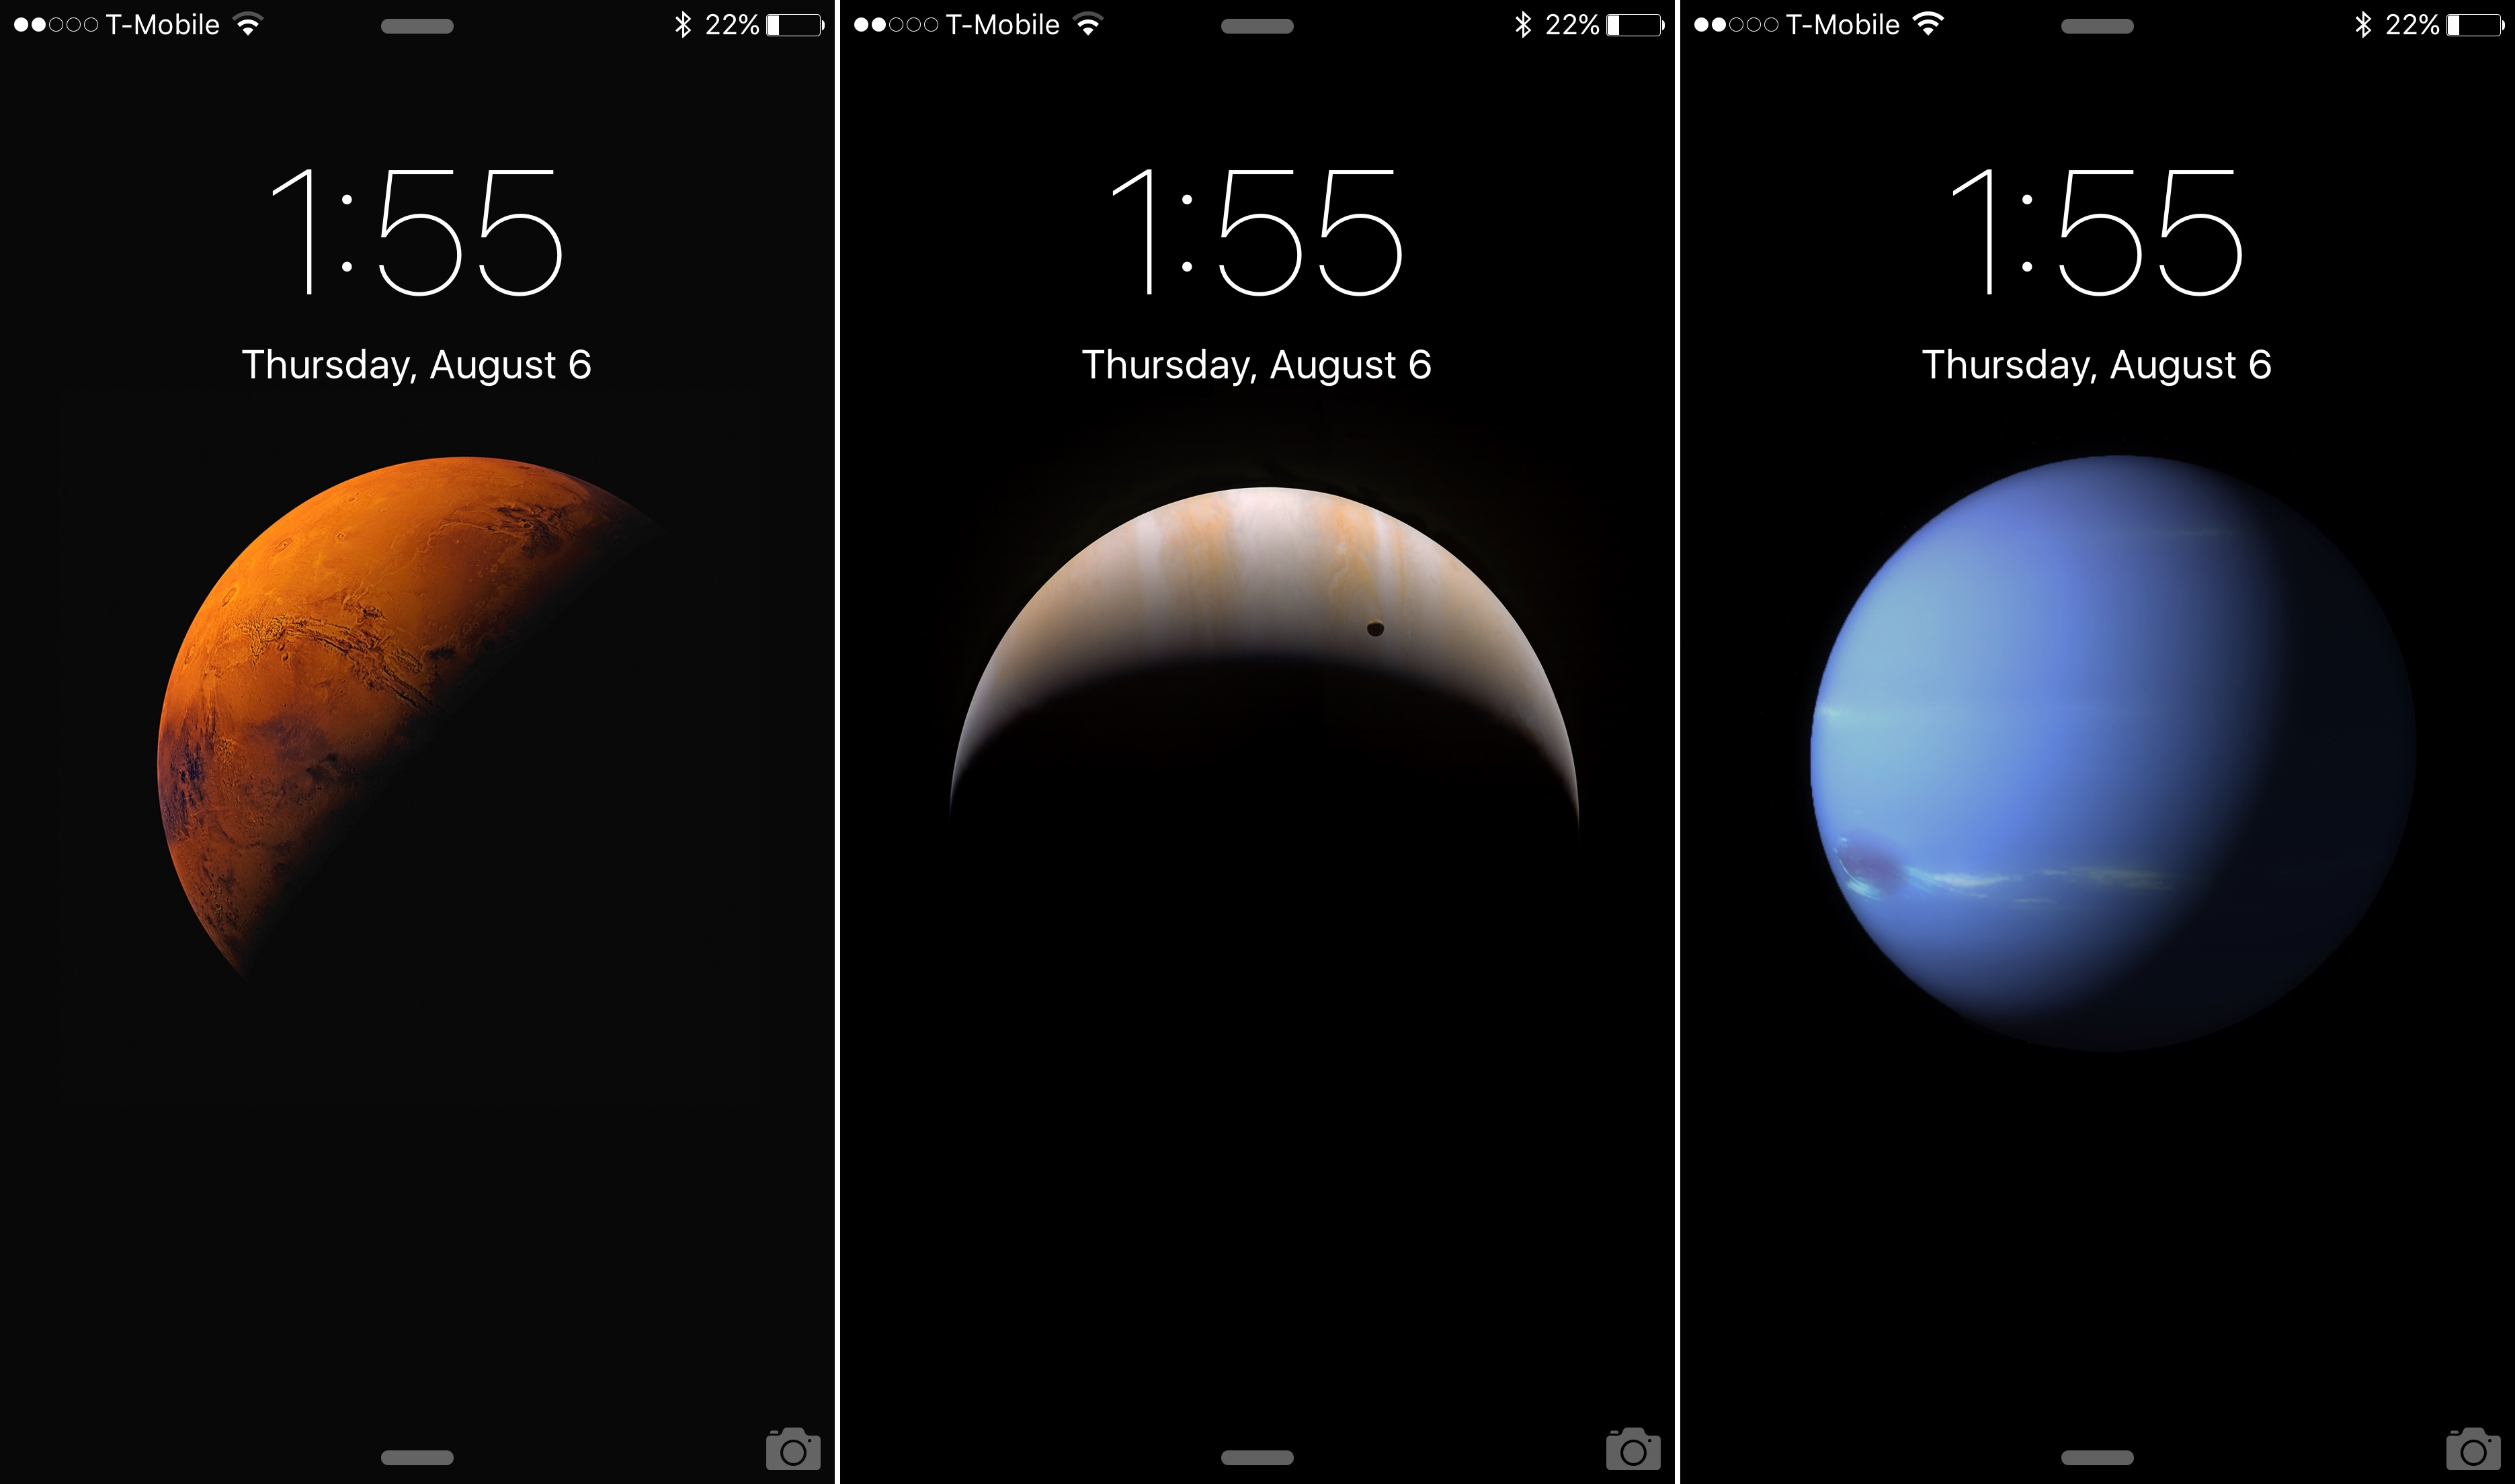 A look at the 15 new wallpapers in iOS 9 beta 5